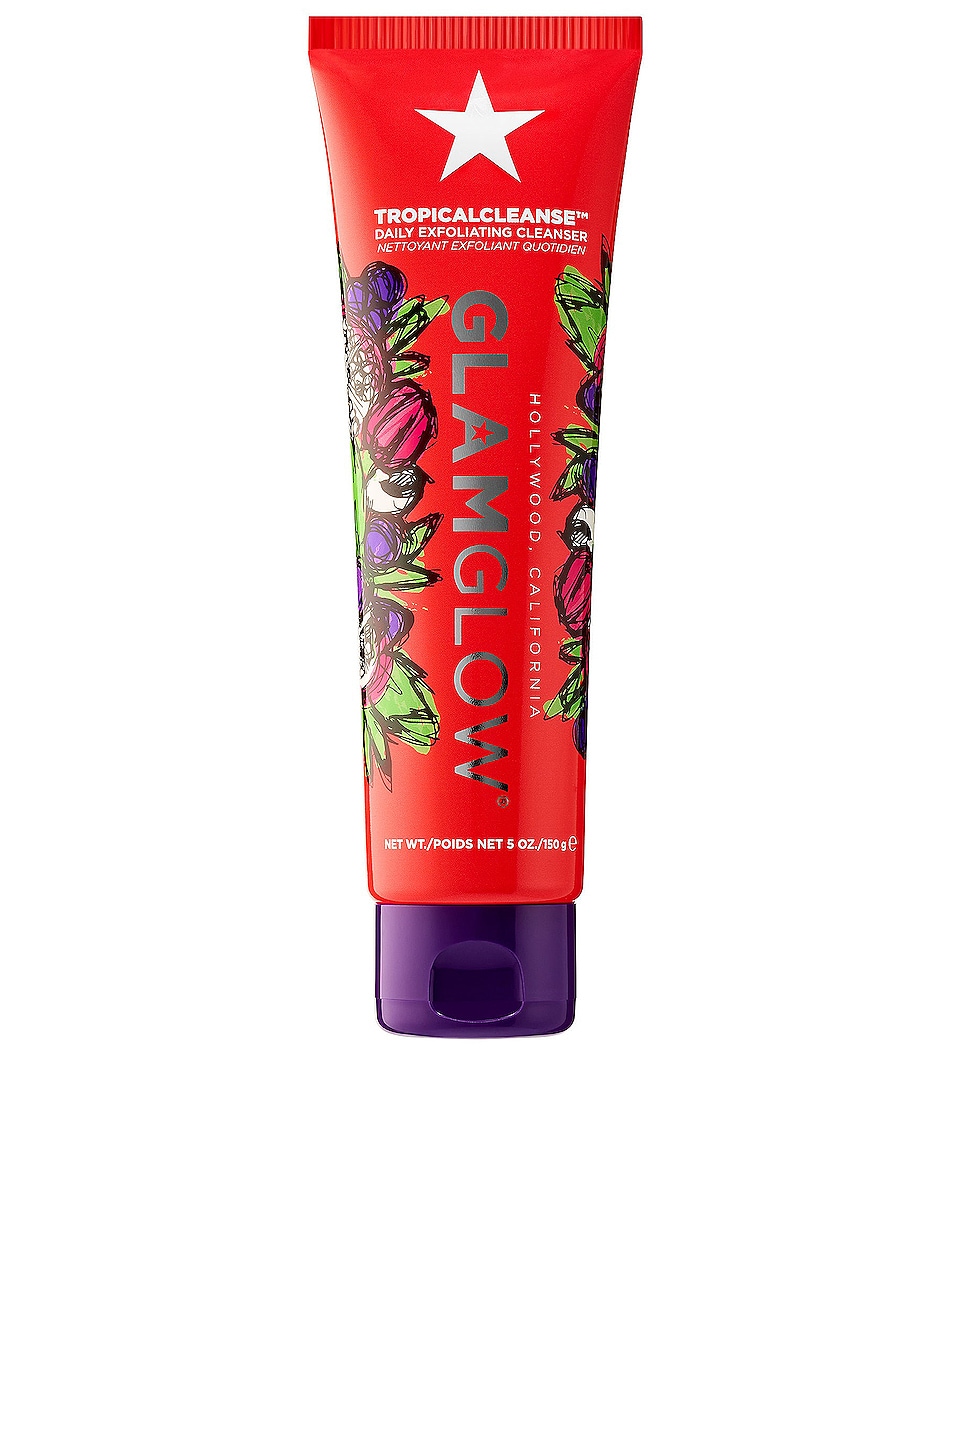 GLAMGLOW TROPICALCLEANSE EXFOLIATING CLEANSER,GMGW-WU46